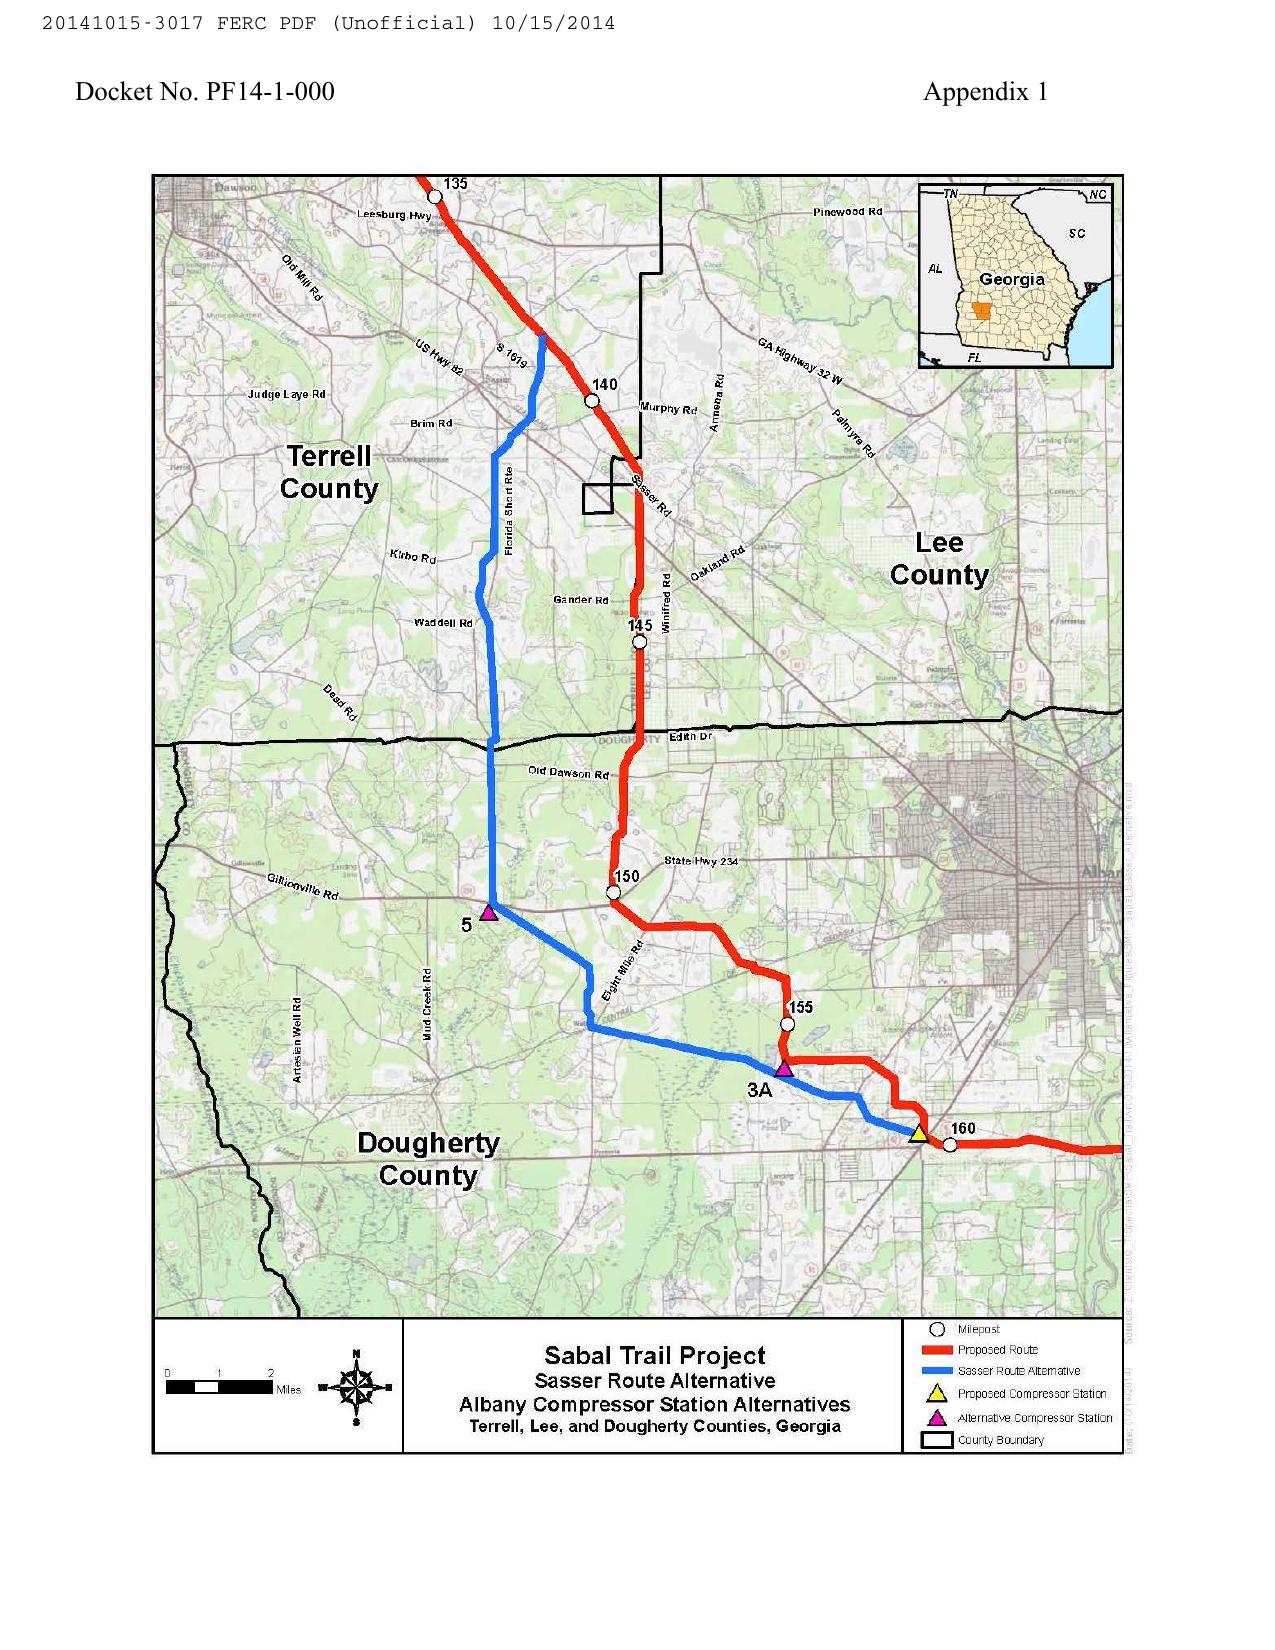 1275x1650 Sasser Route Alternative, Albany Compressor station Alternatives, Terrell, Lee, and Dougherty Counties. Georgia, in Sabal Trail Notice of EIS Intent, by John S. Quarterman, for SpectraBusters.org, 15 October 2014